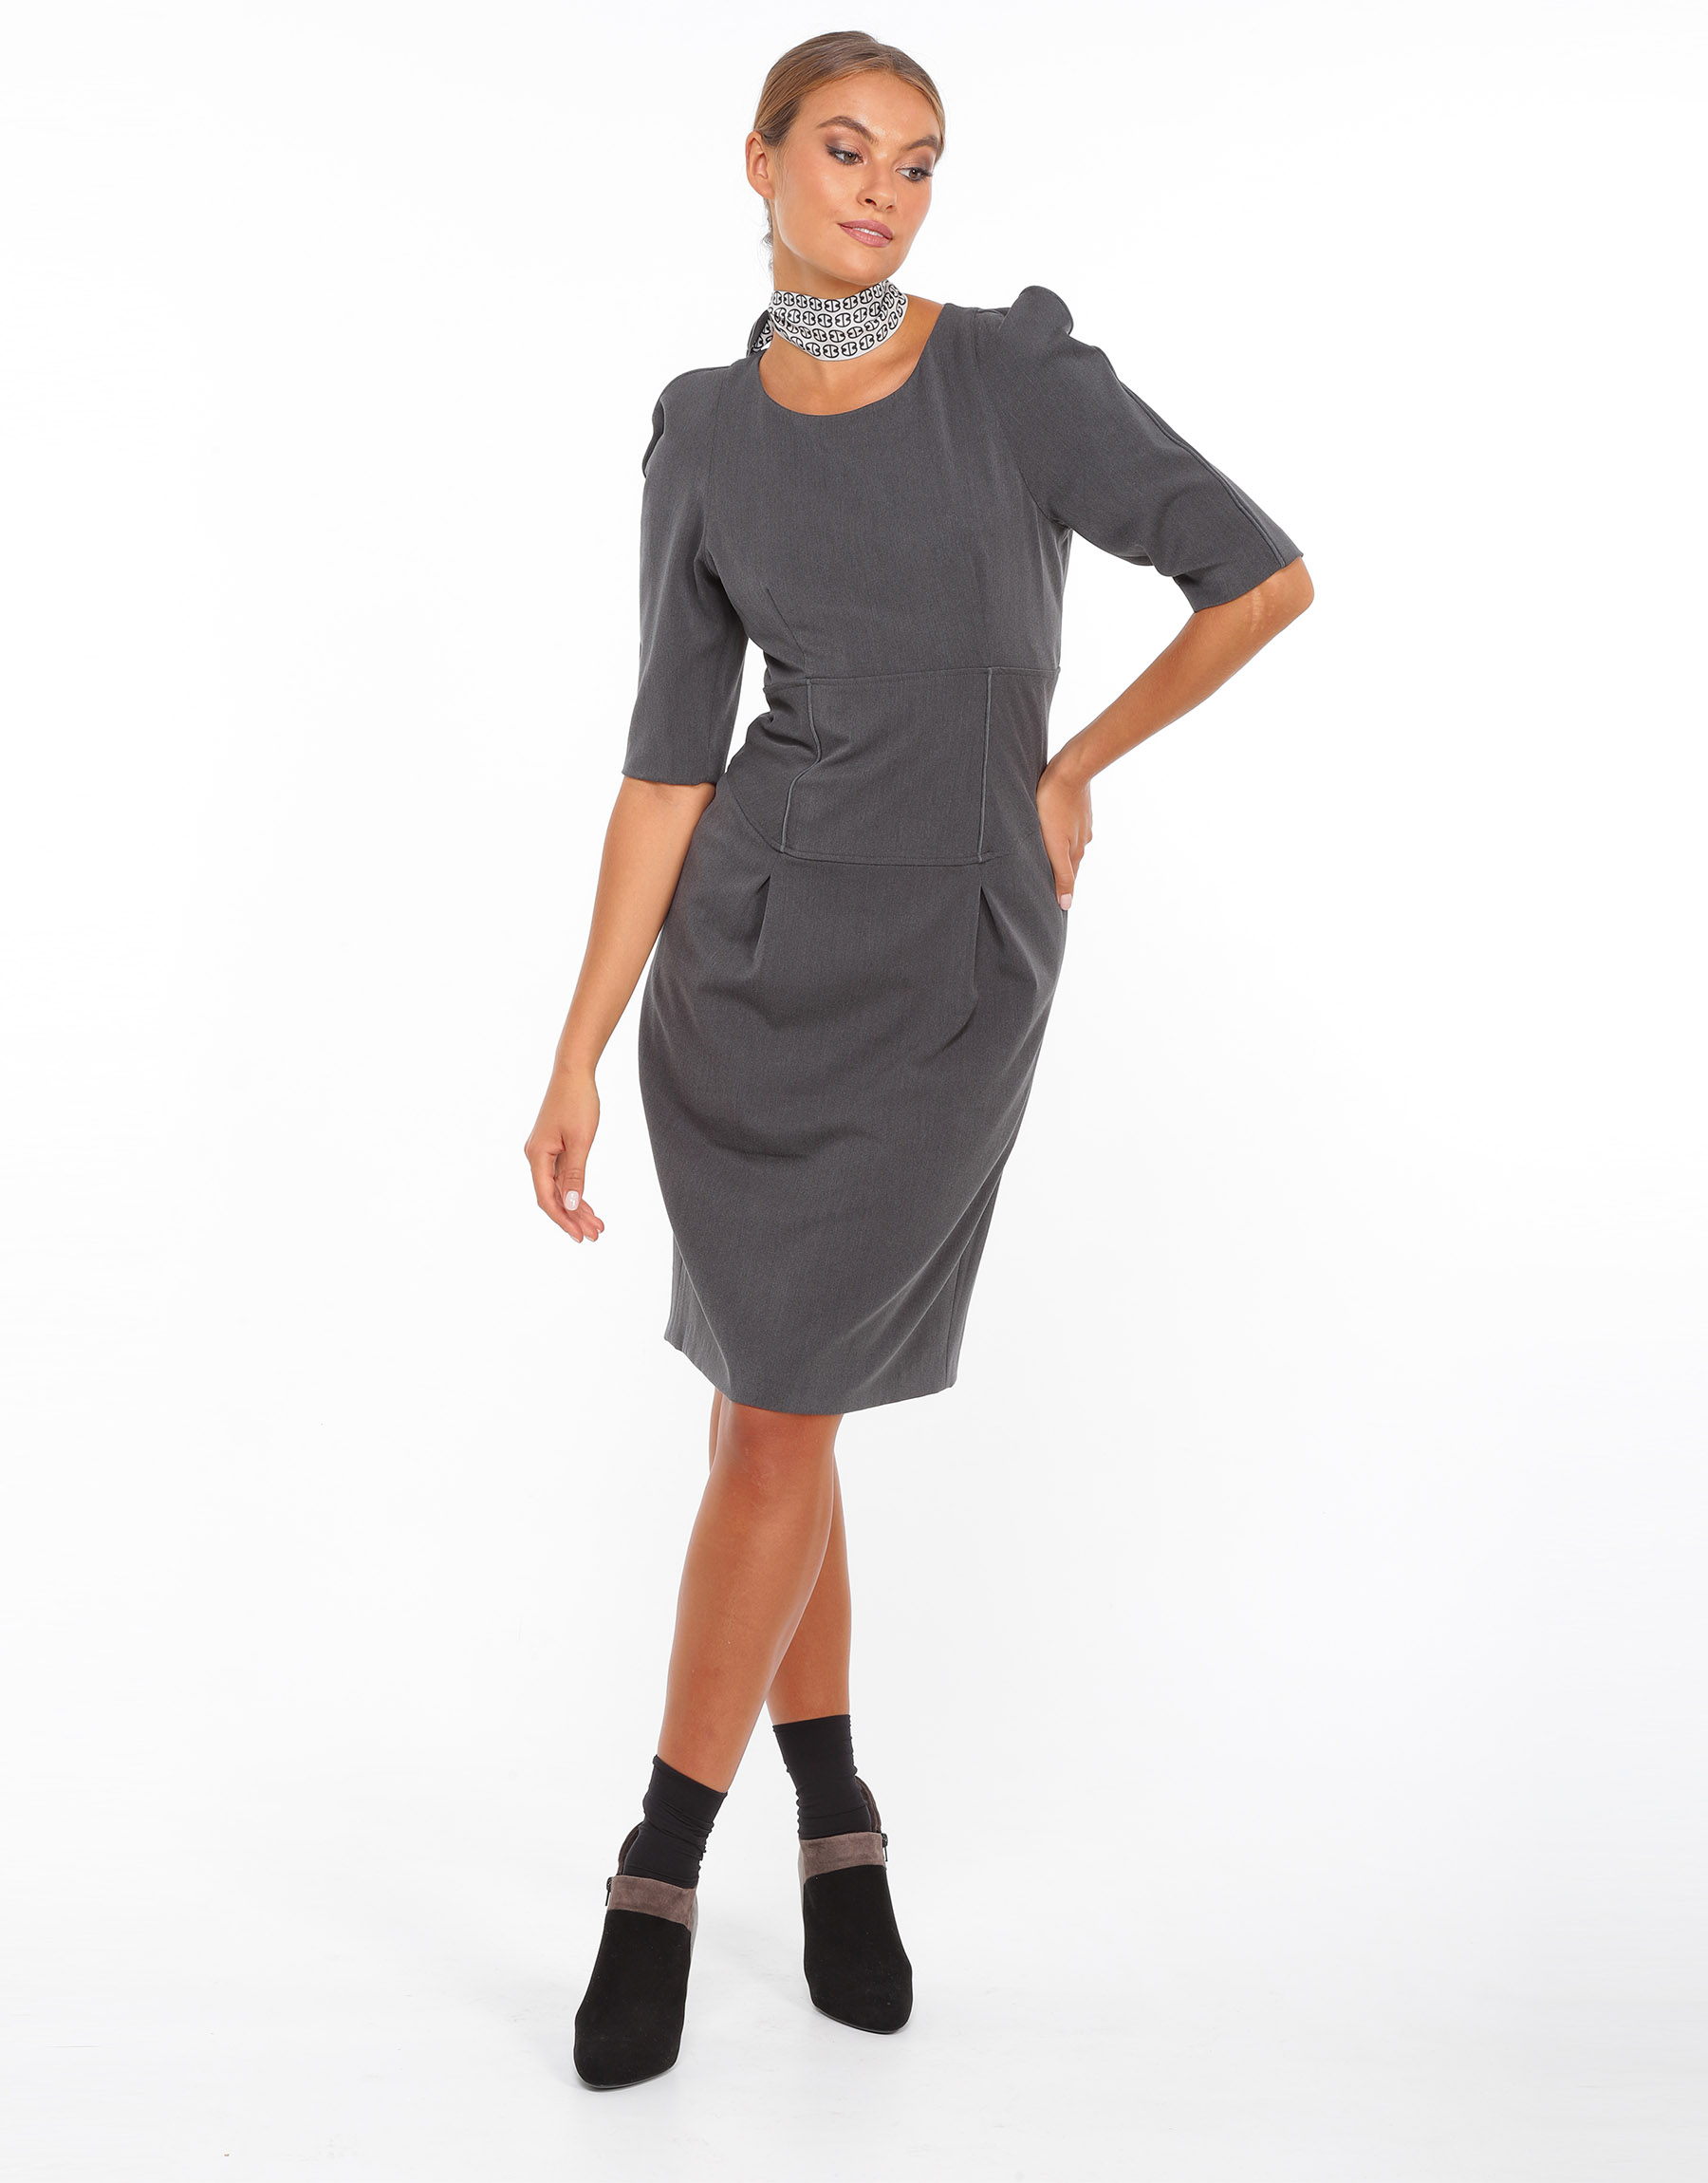 Straight dress curved in steel gray crepe